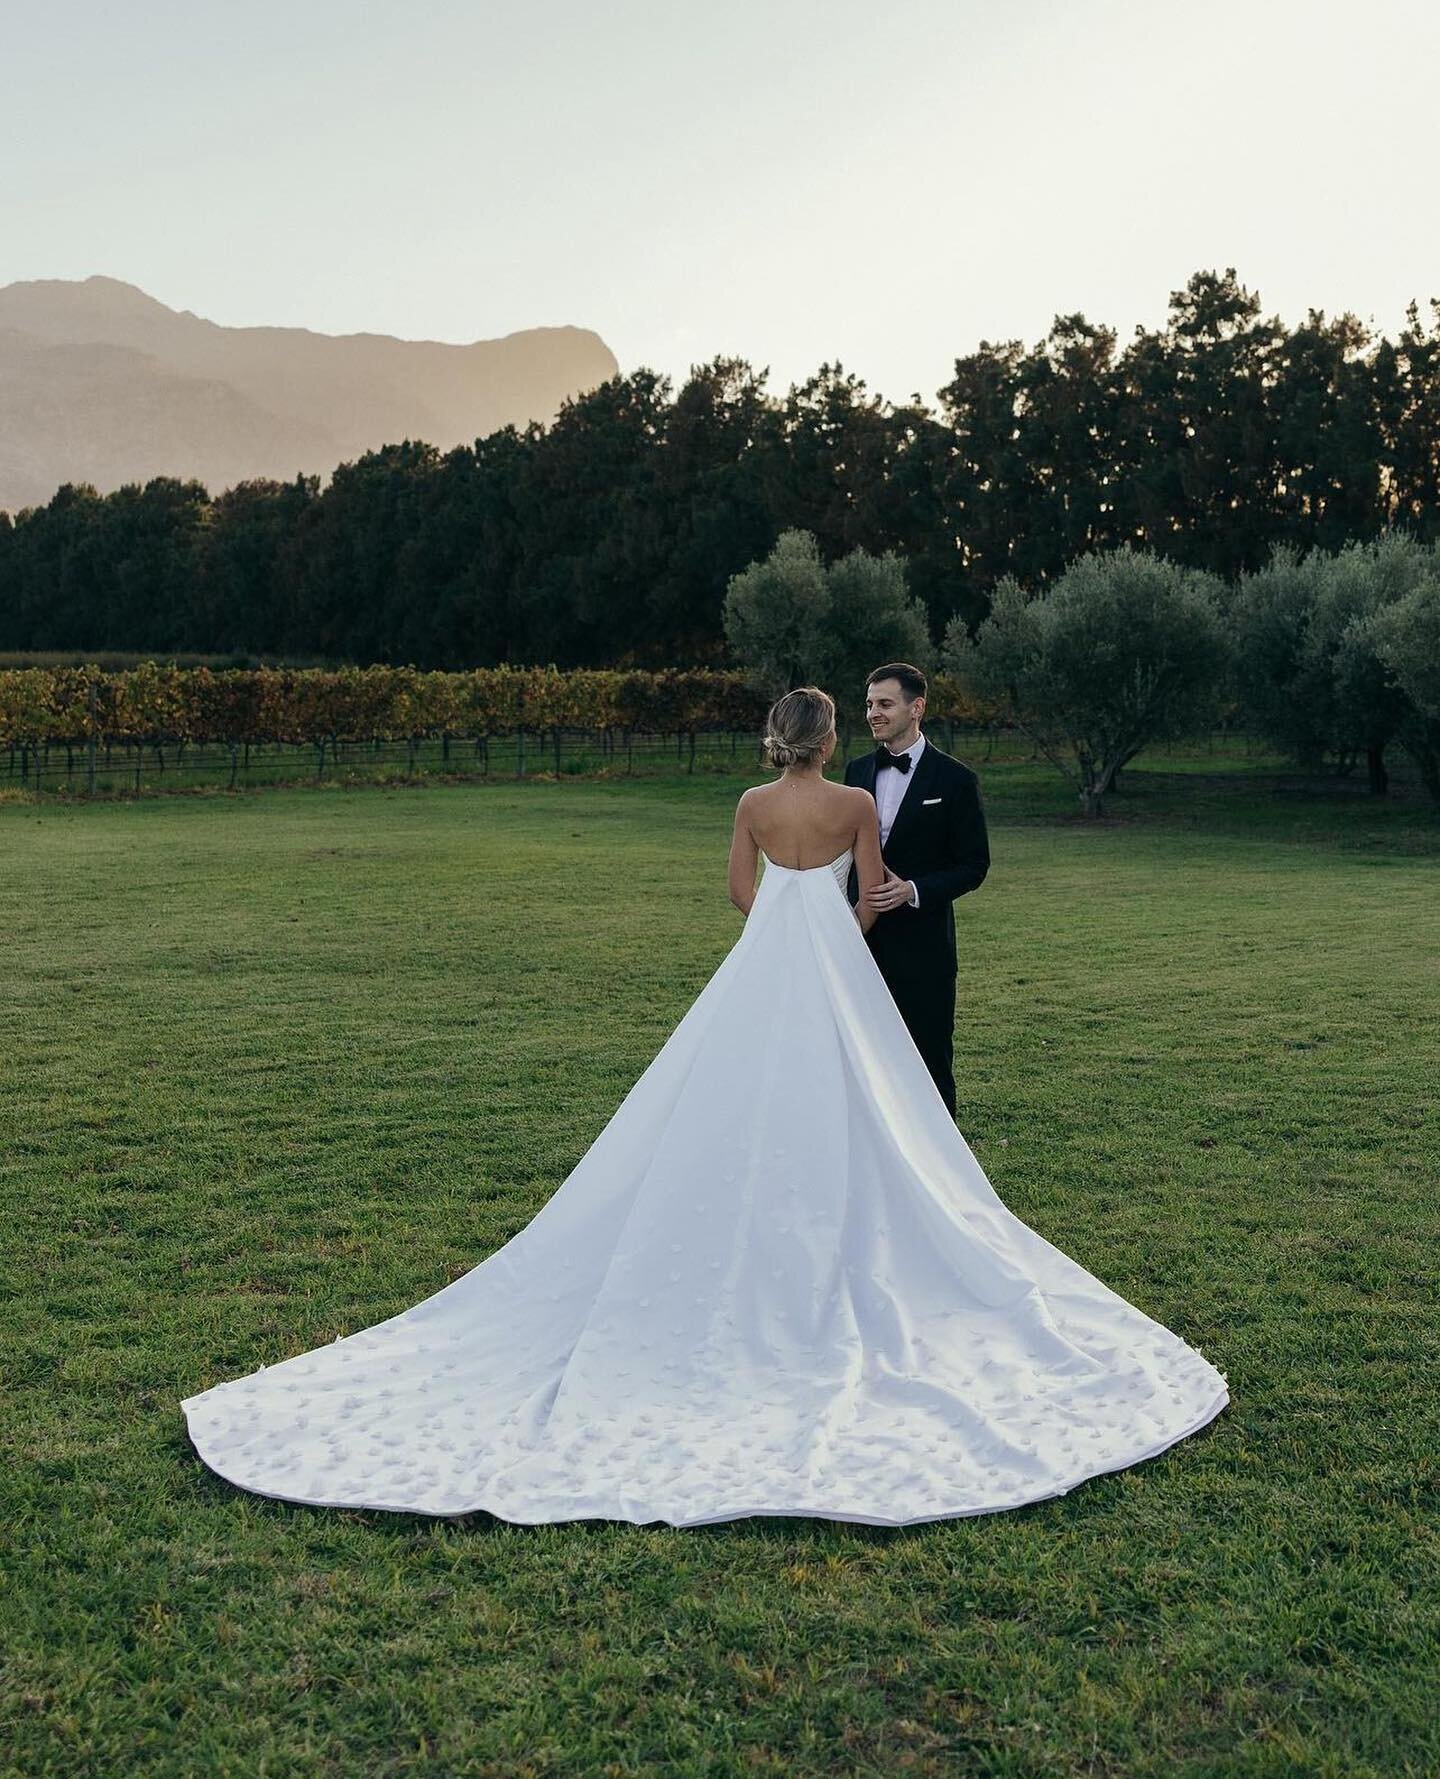 Say 'I do' in unforgettable style at MAISON, where dreams come true amidst the vineyard romance 💍 

Photography by @hanrumaraisphotography 

maisonestate.co.za